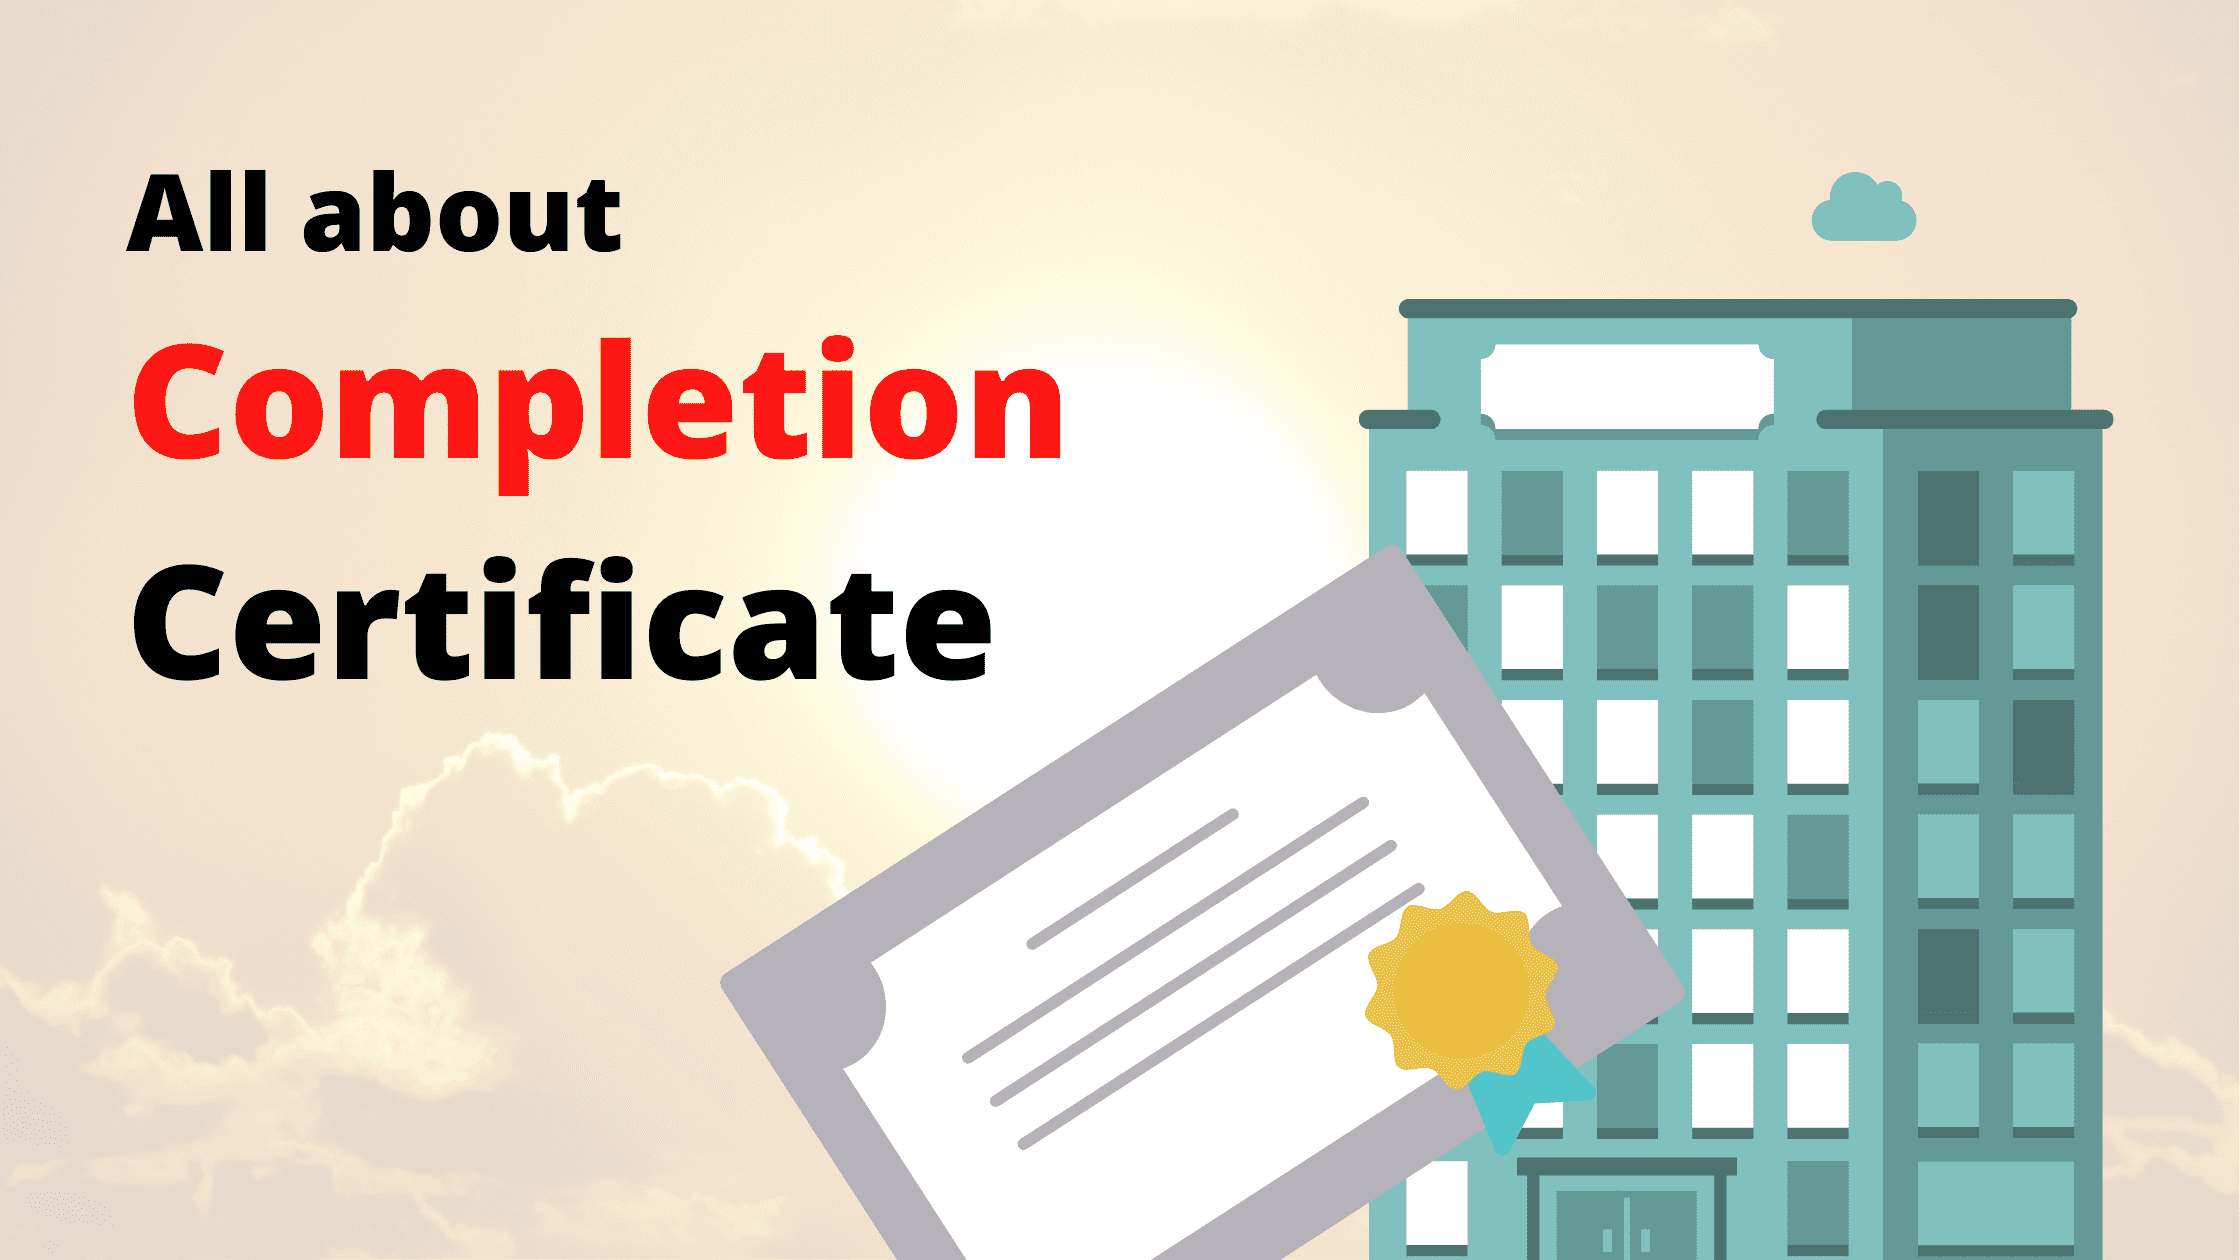 What is Completion Certificate?